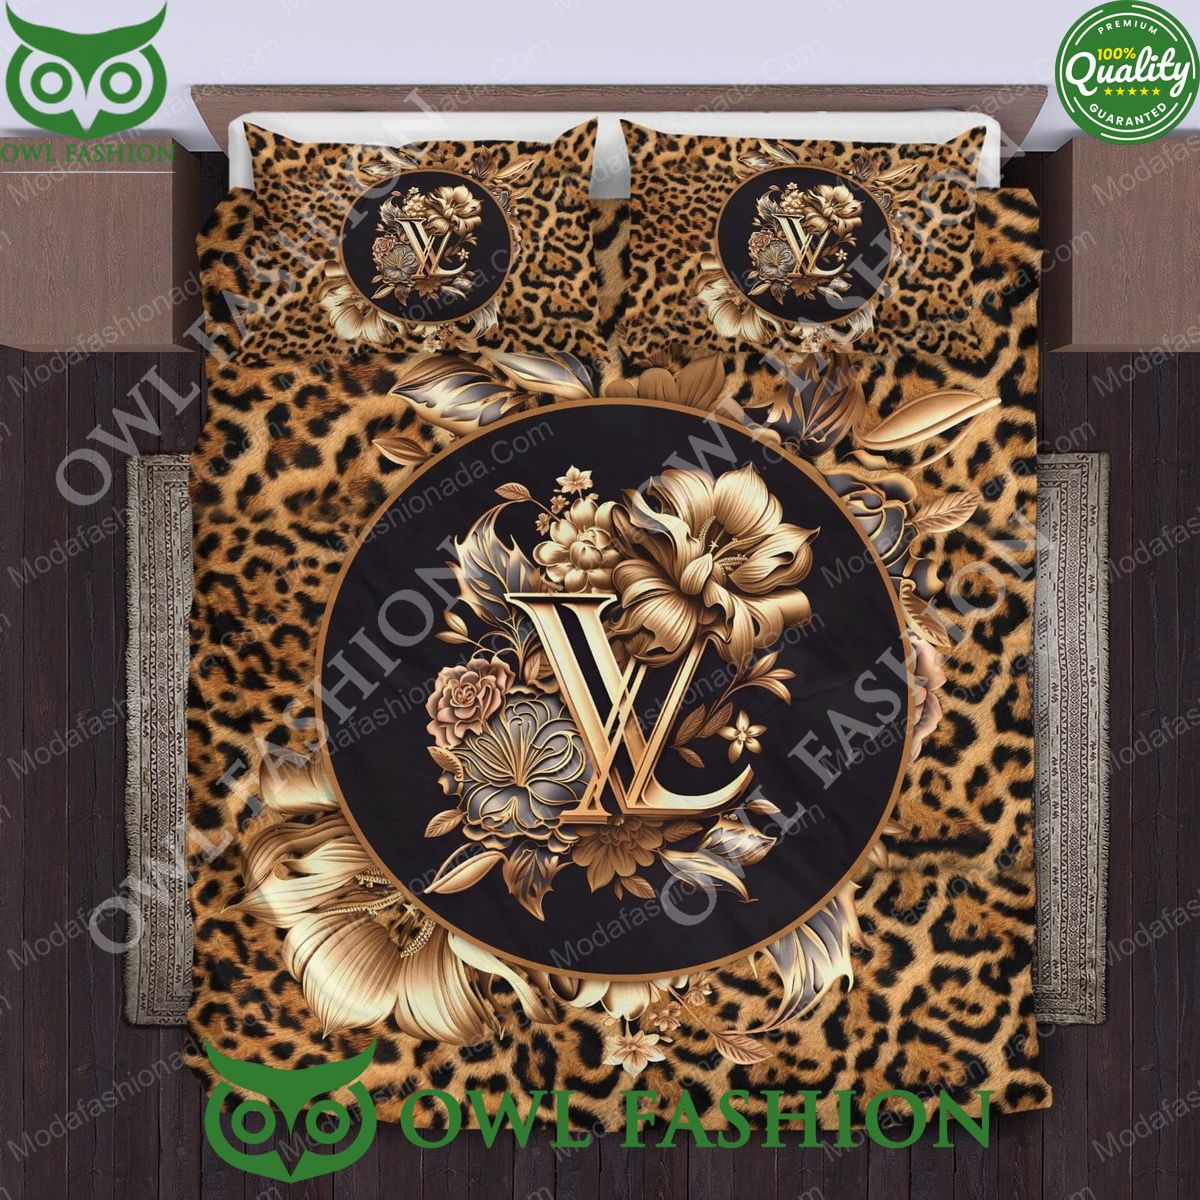 Flowers And Leopard Pattern Louis Vuitton Bedding Sets Best click of yours